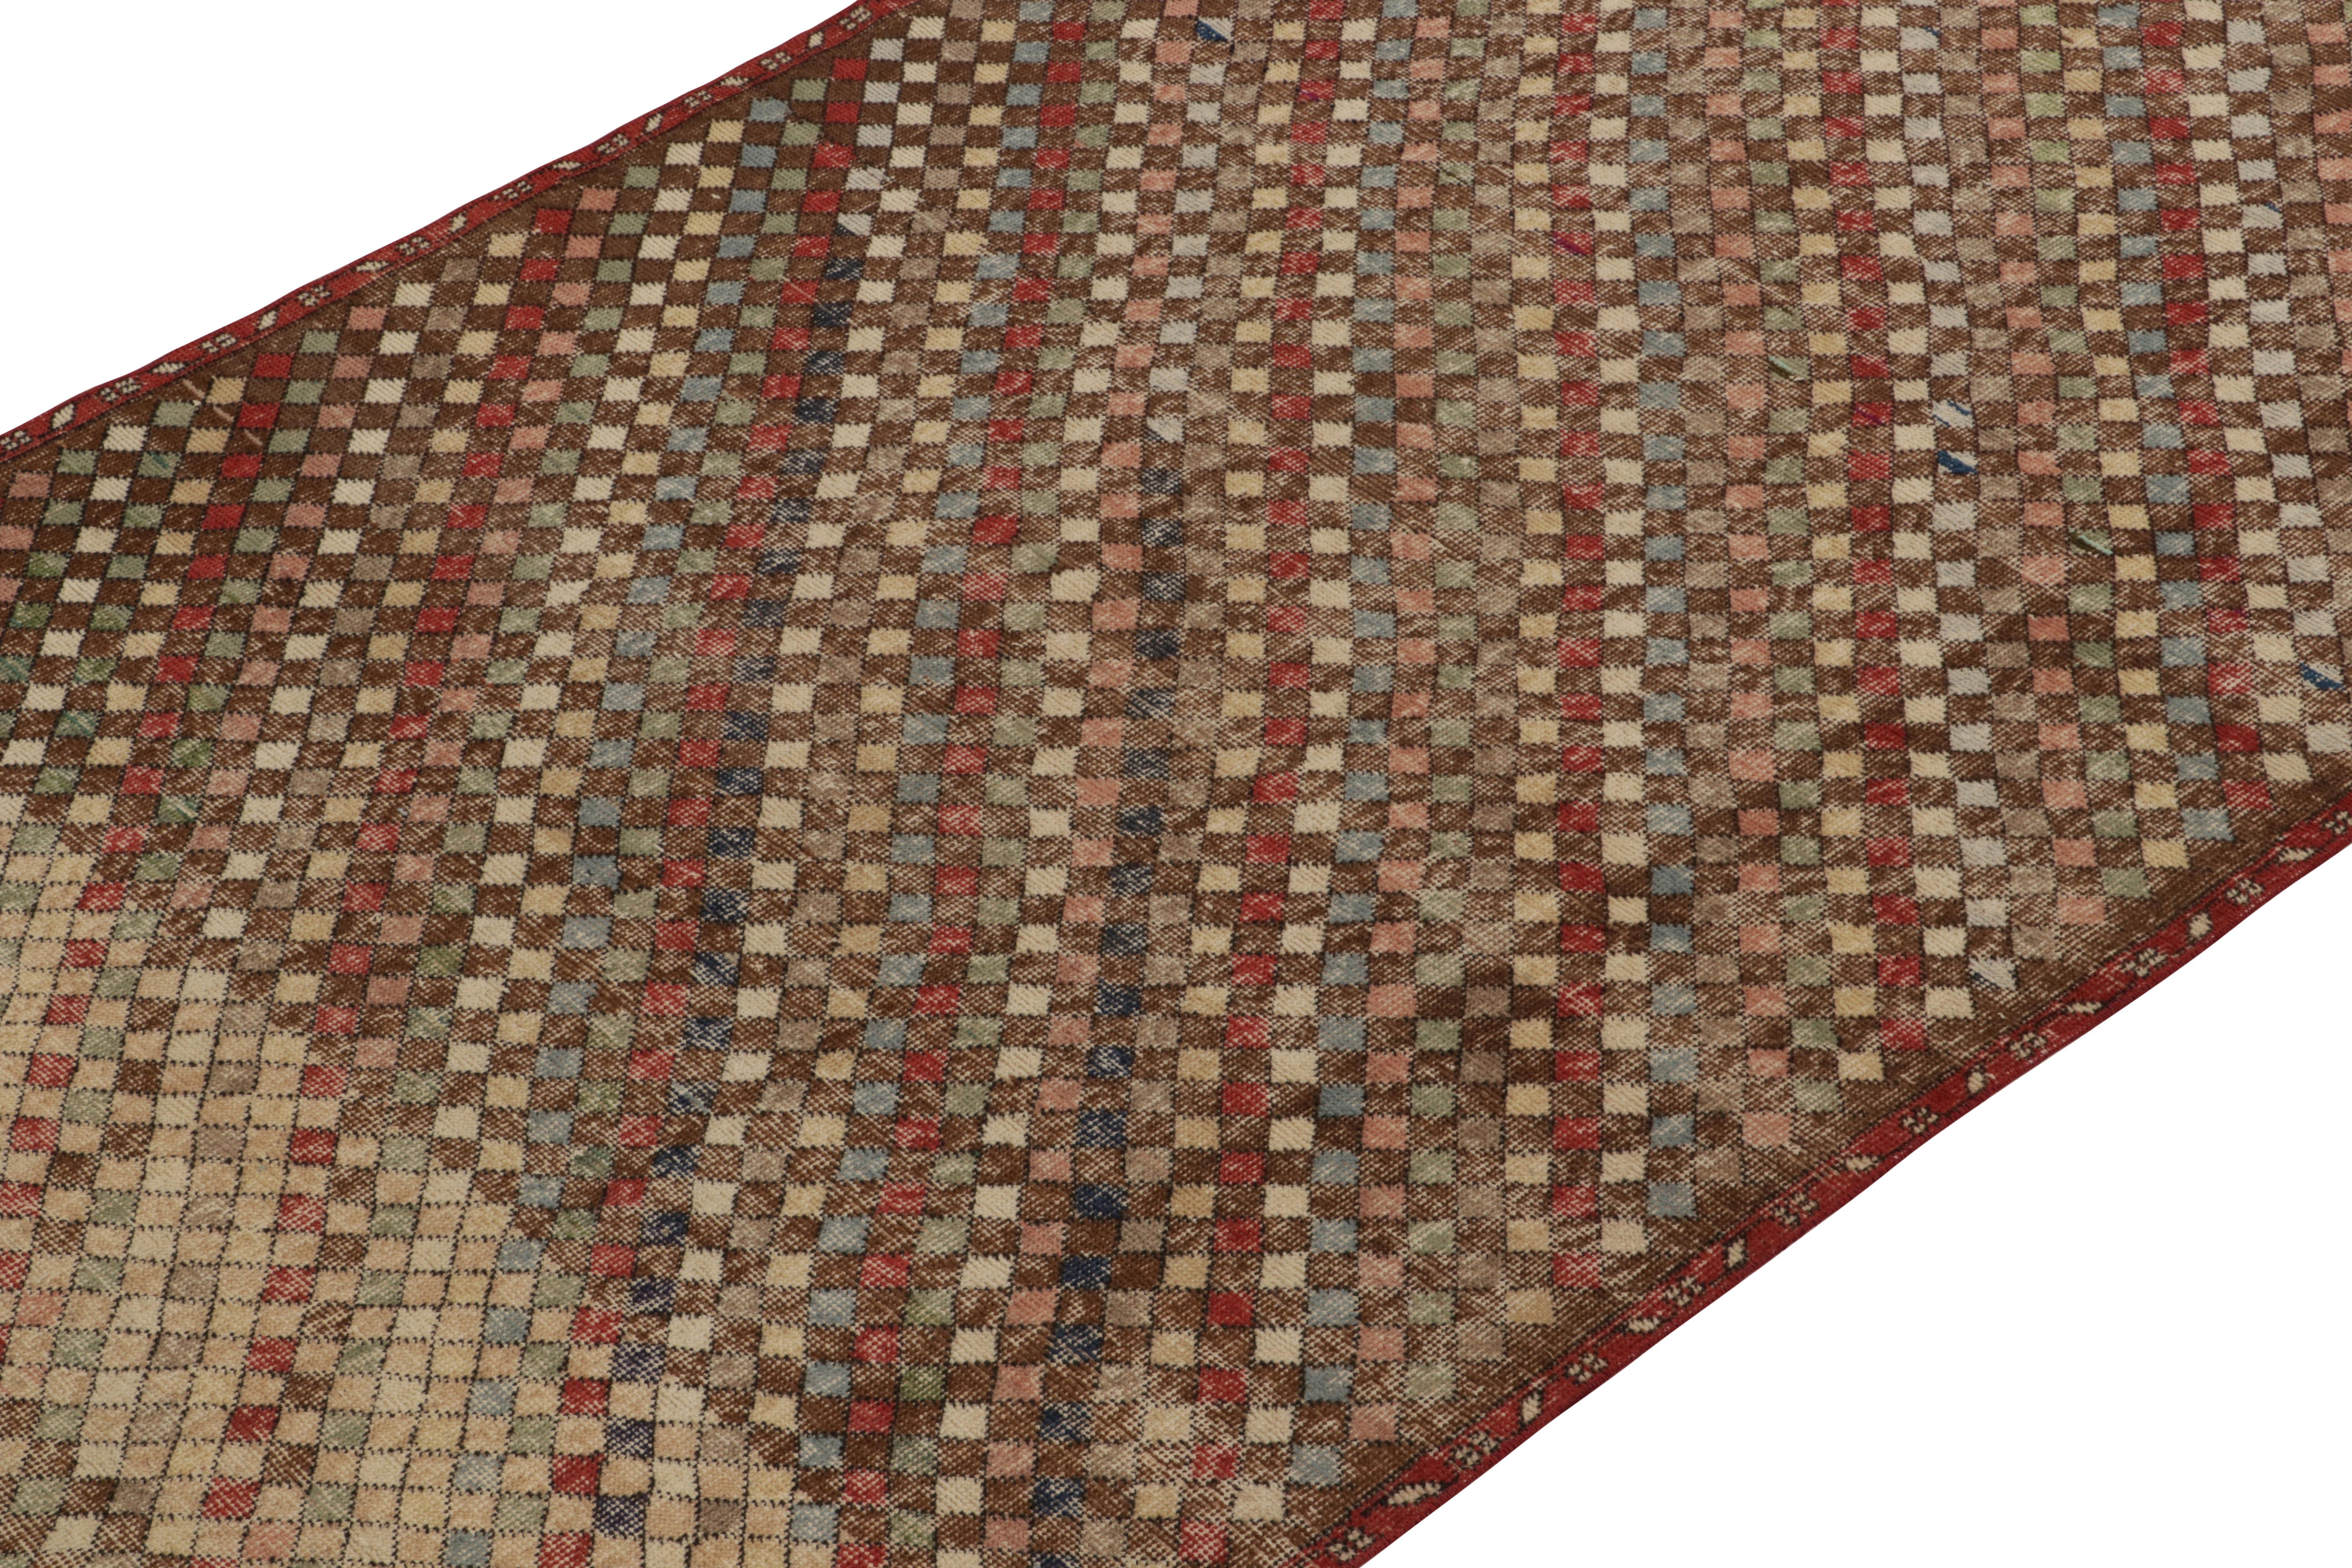 Hand-Knotted 1960s Vintage Distressed Rug in Red, Beige-Brown and Multi Hued by Rug & Kilim For Sale